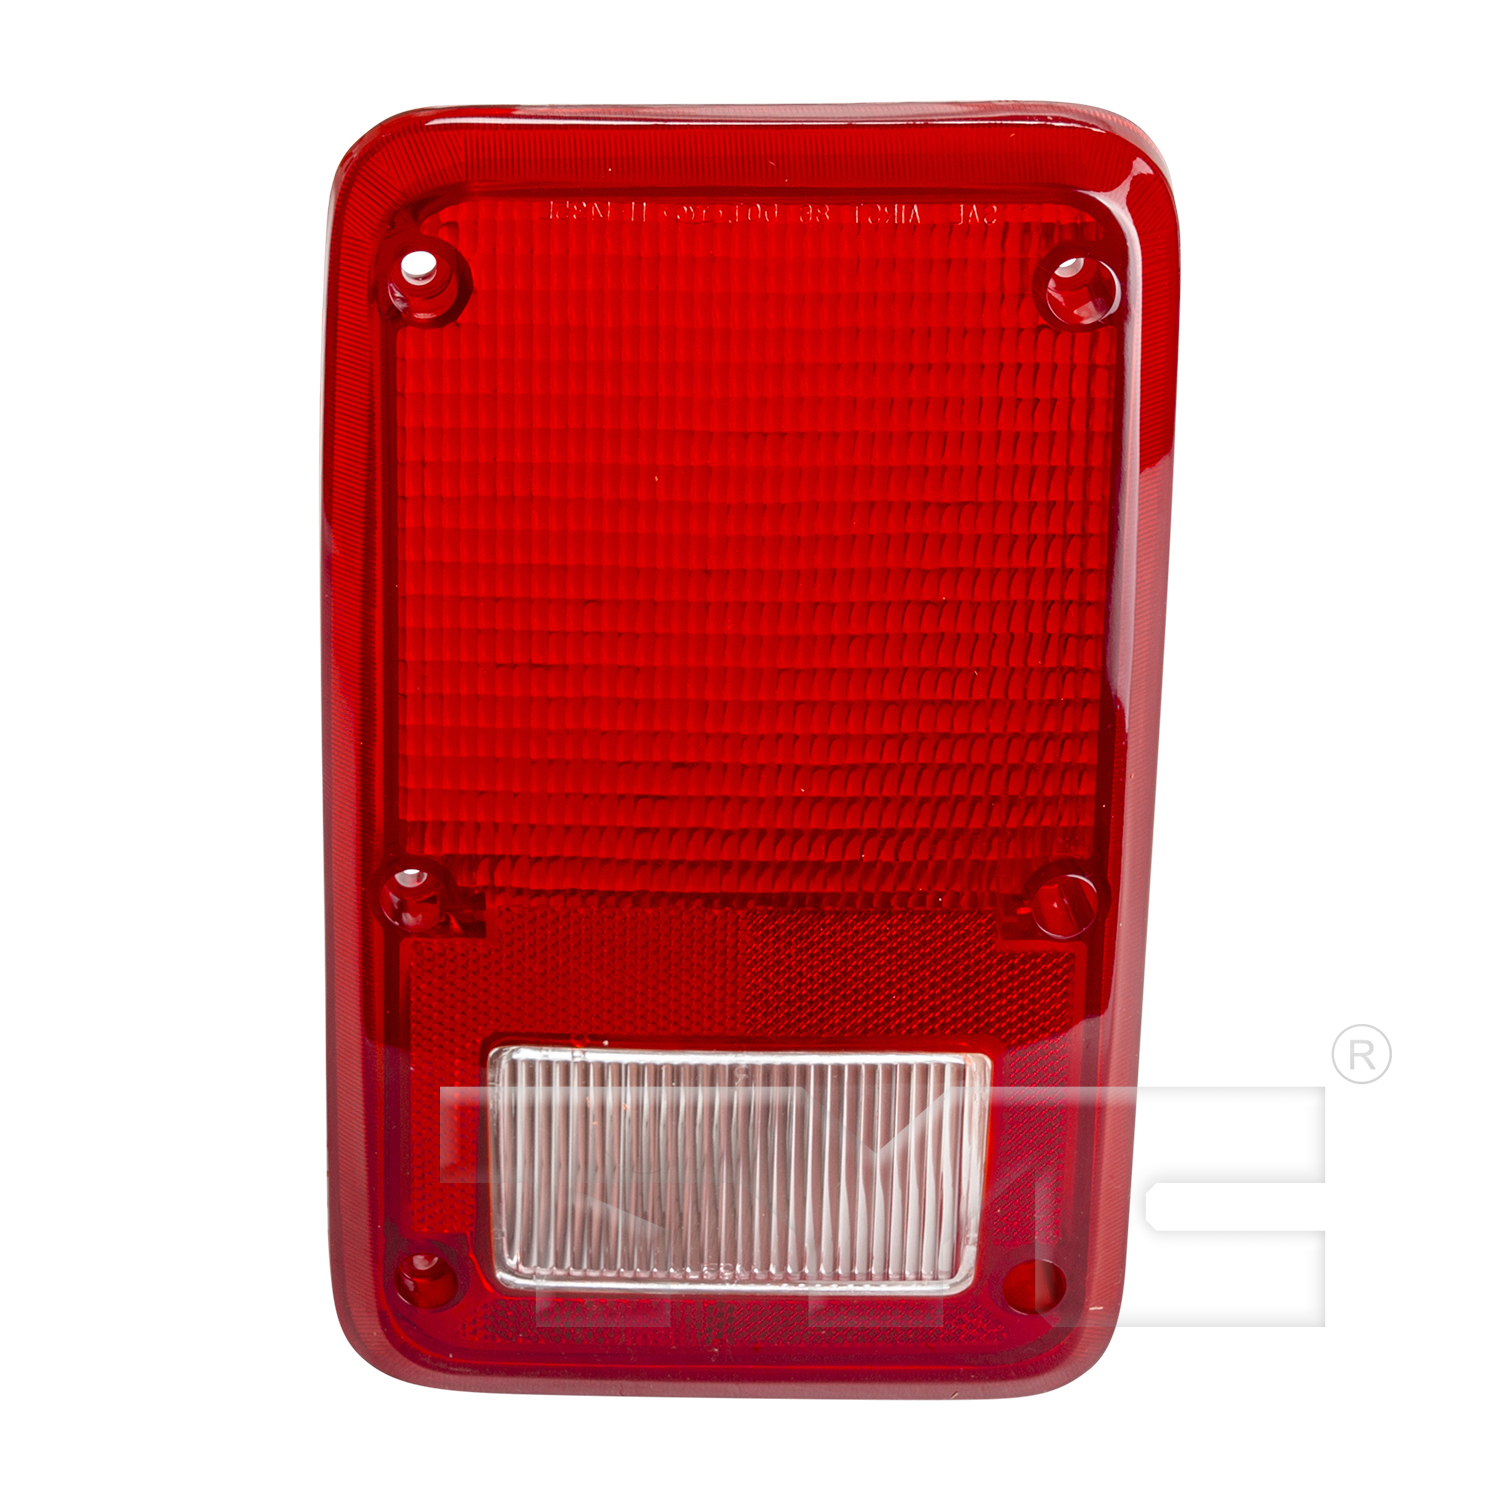 Aftermarket TAILLIGHTS for DODGE - B250, B250,81-93,LT Taillamp lens